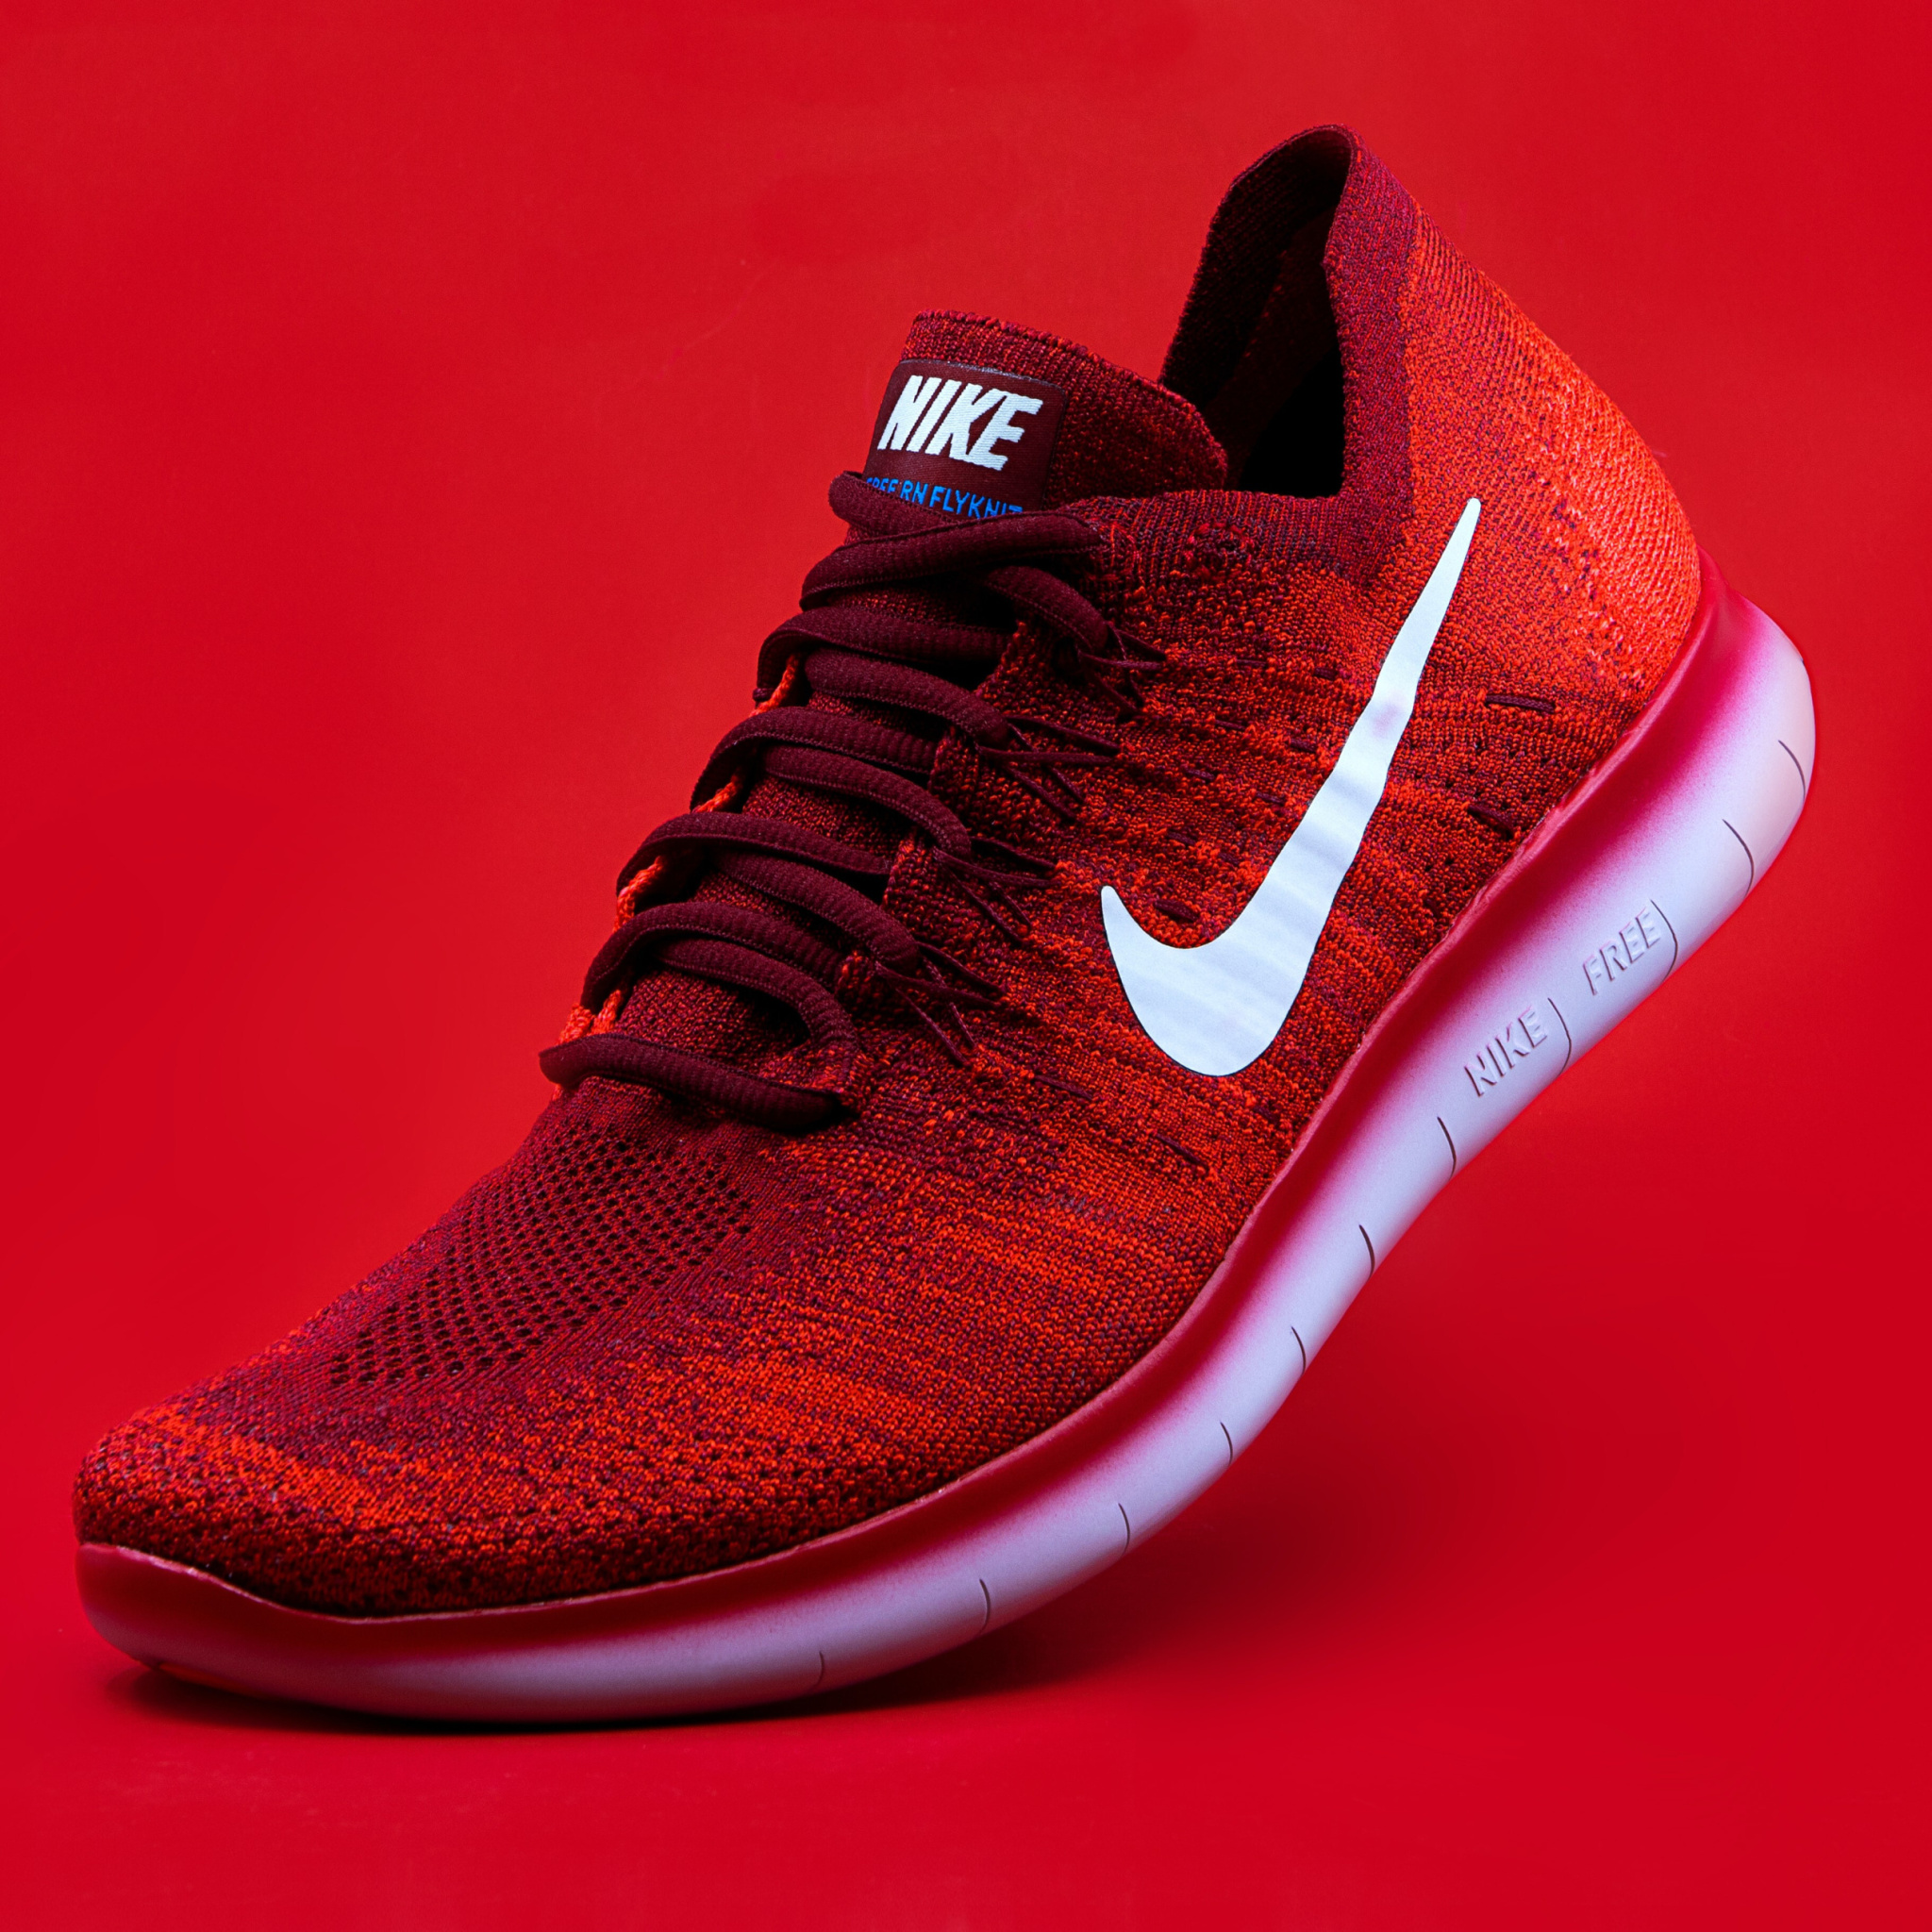 Red Nike Shoes wallpaper 2048x2048